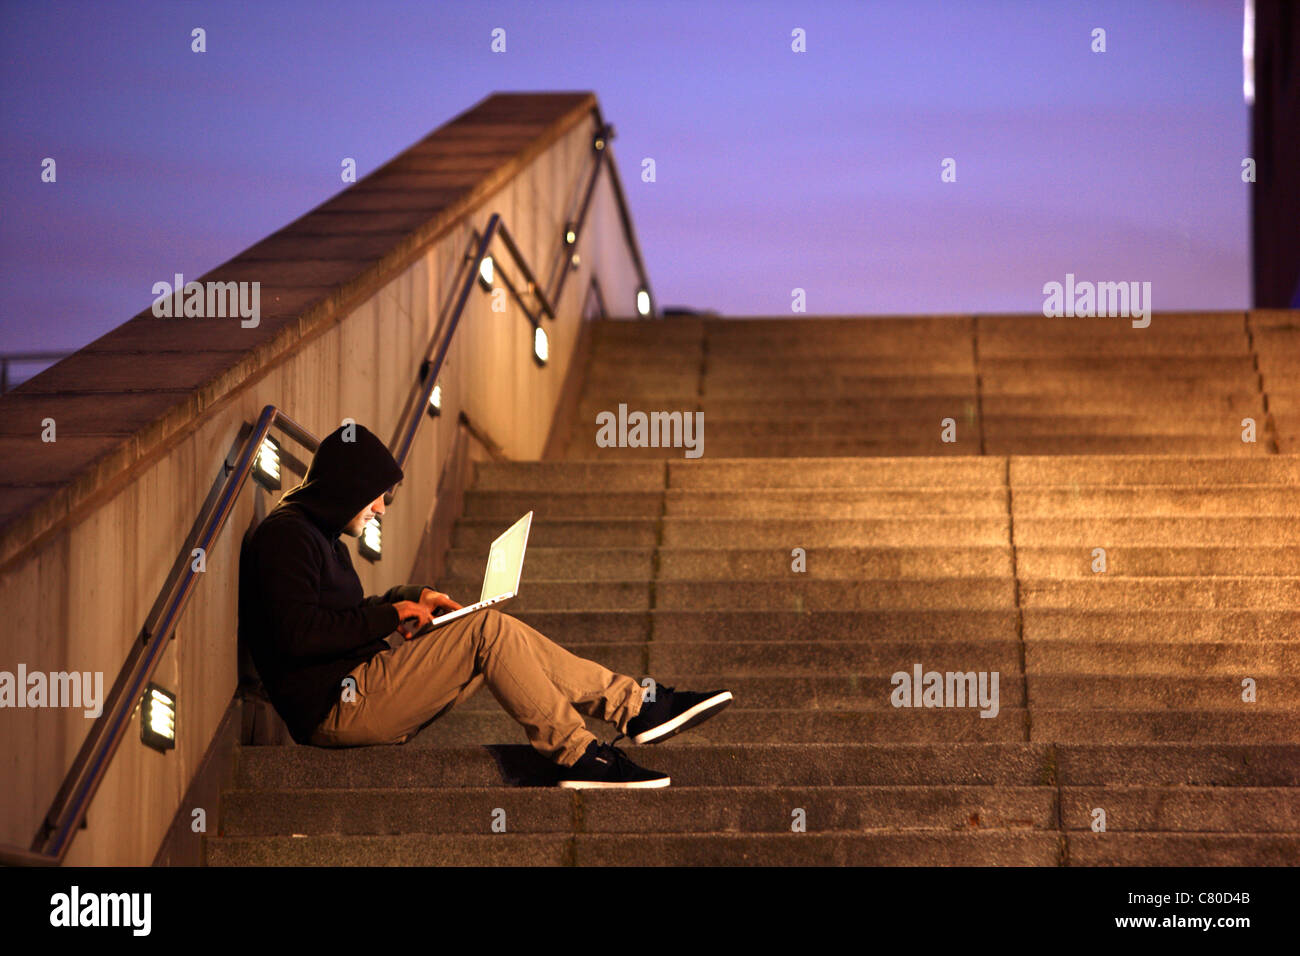 Computer user, hacker, sits conspiratorially, outside, on stairs, with a laptop. Symbol picture, computer-Internet crime. Stock Photo